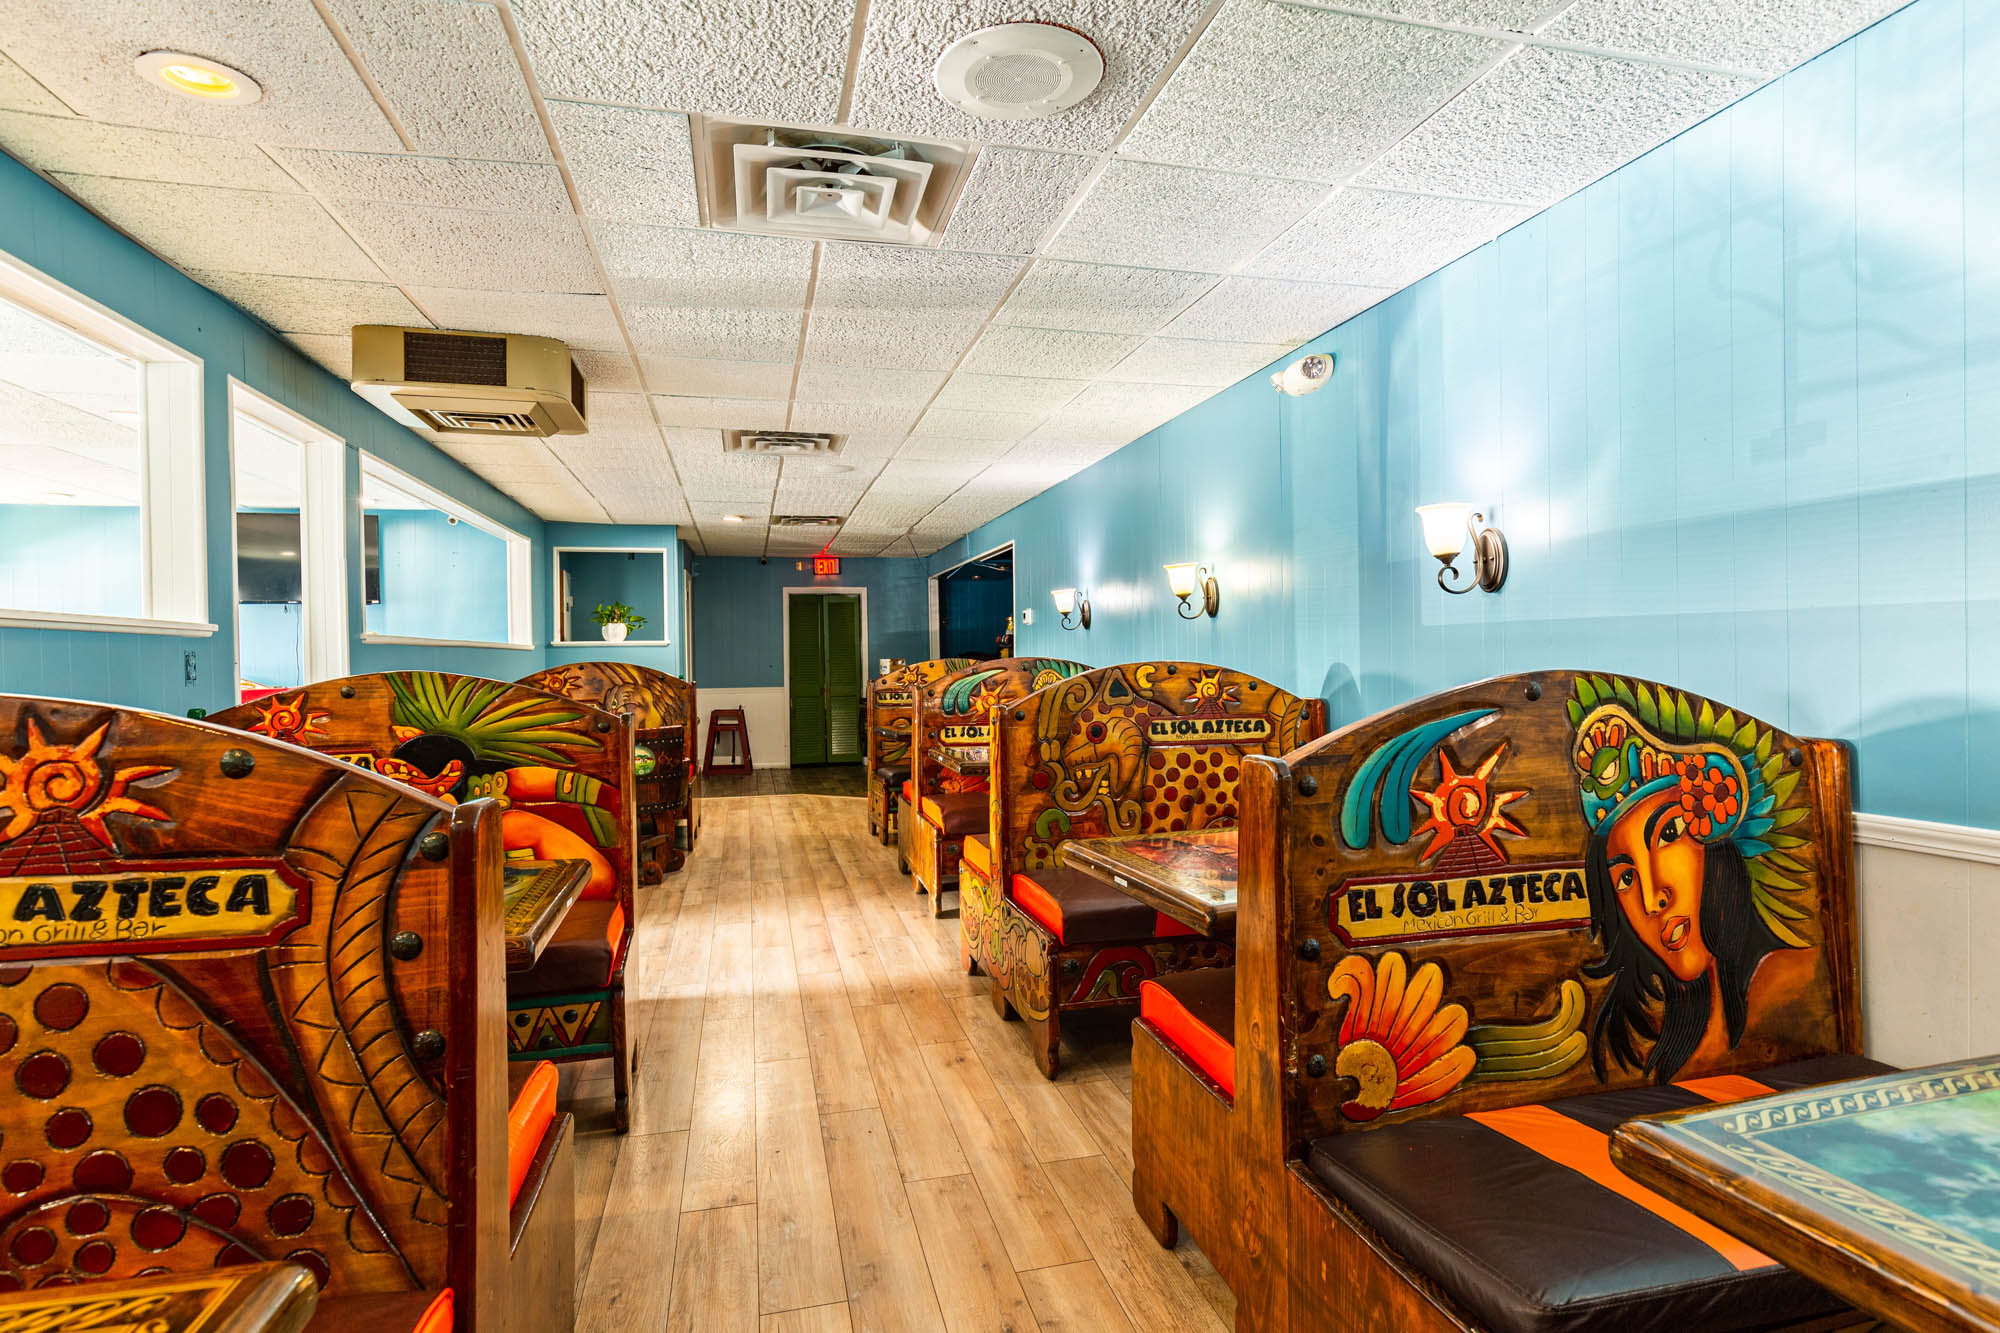 Painted restaurant booths and seats with sea world and desert motifs